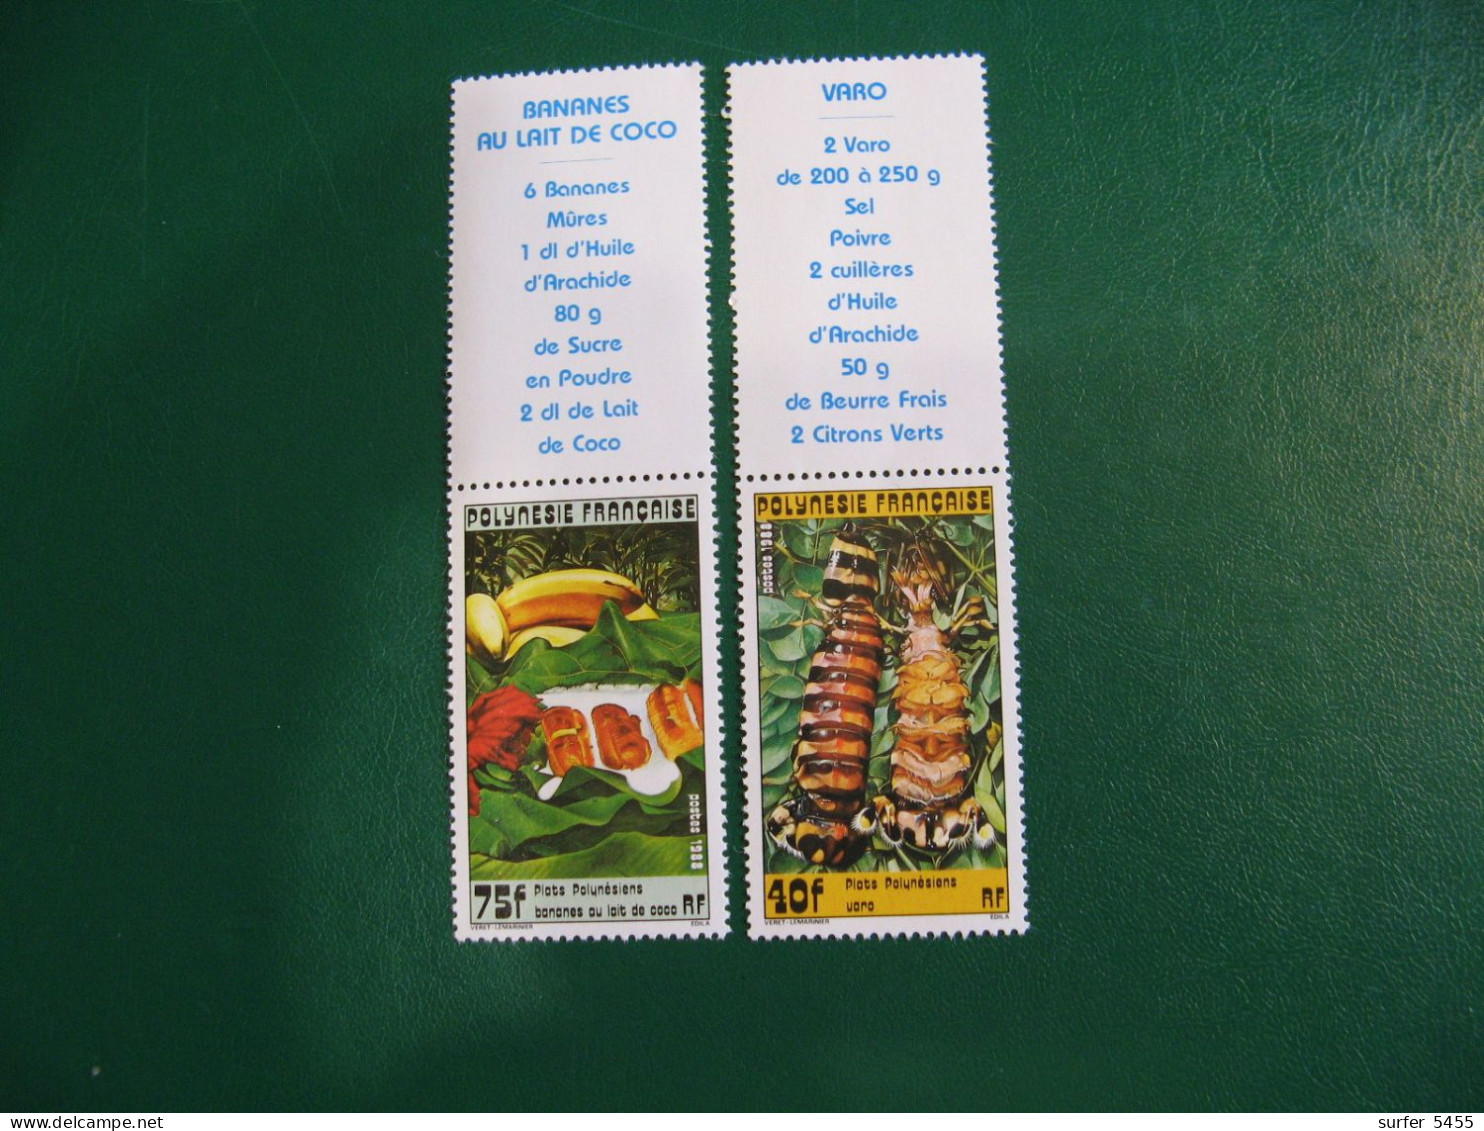 P0LYNESIE YVERT POSTE ORDINAIRE N° 295/296 TIMBRES NEUFS ** LUXE - MNH - SERIE COMPLETE - COTE 5,10 EUROS - Unused Stamps